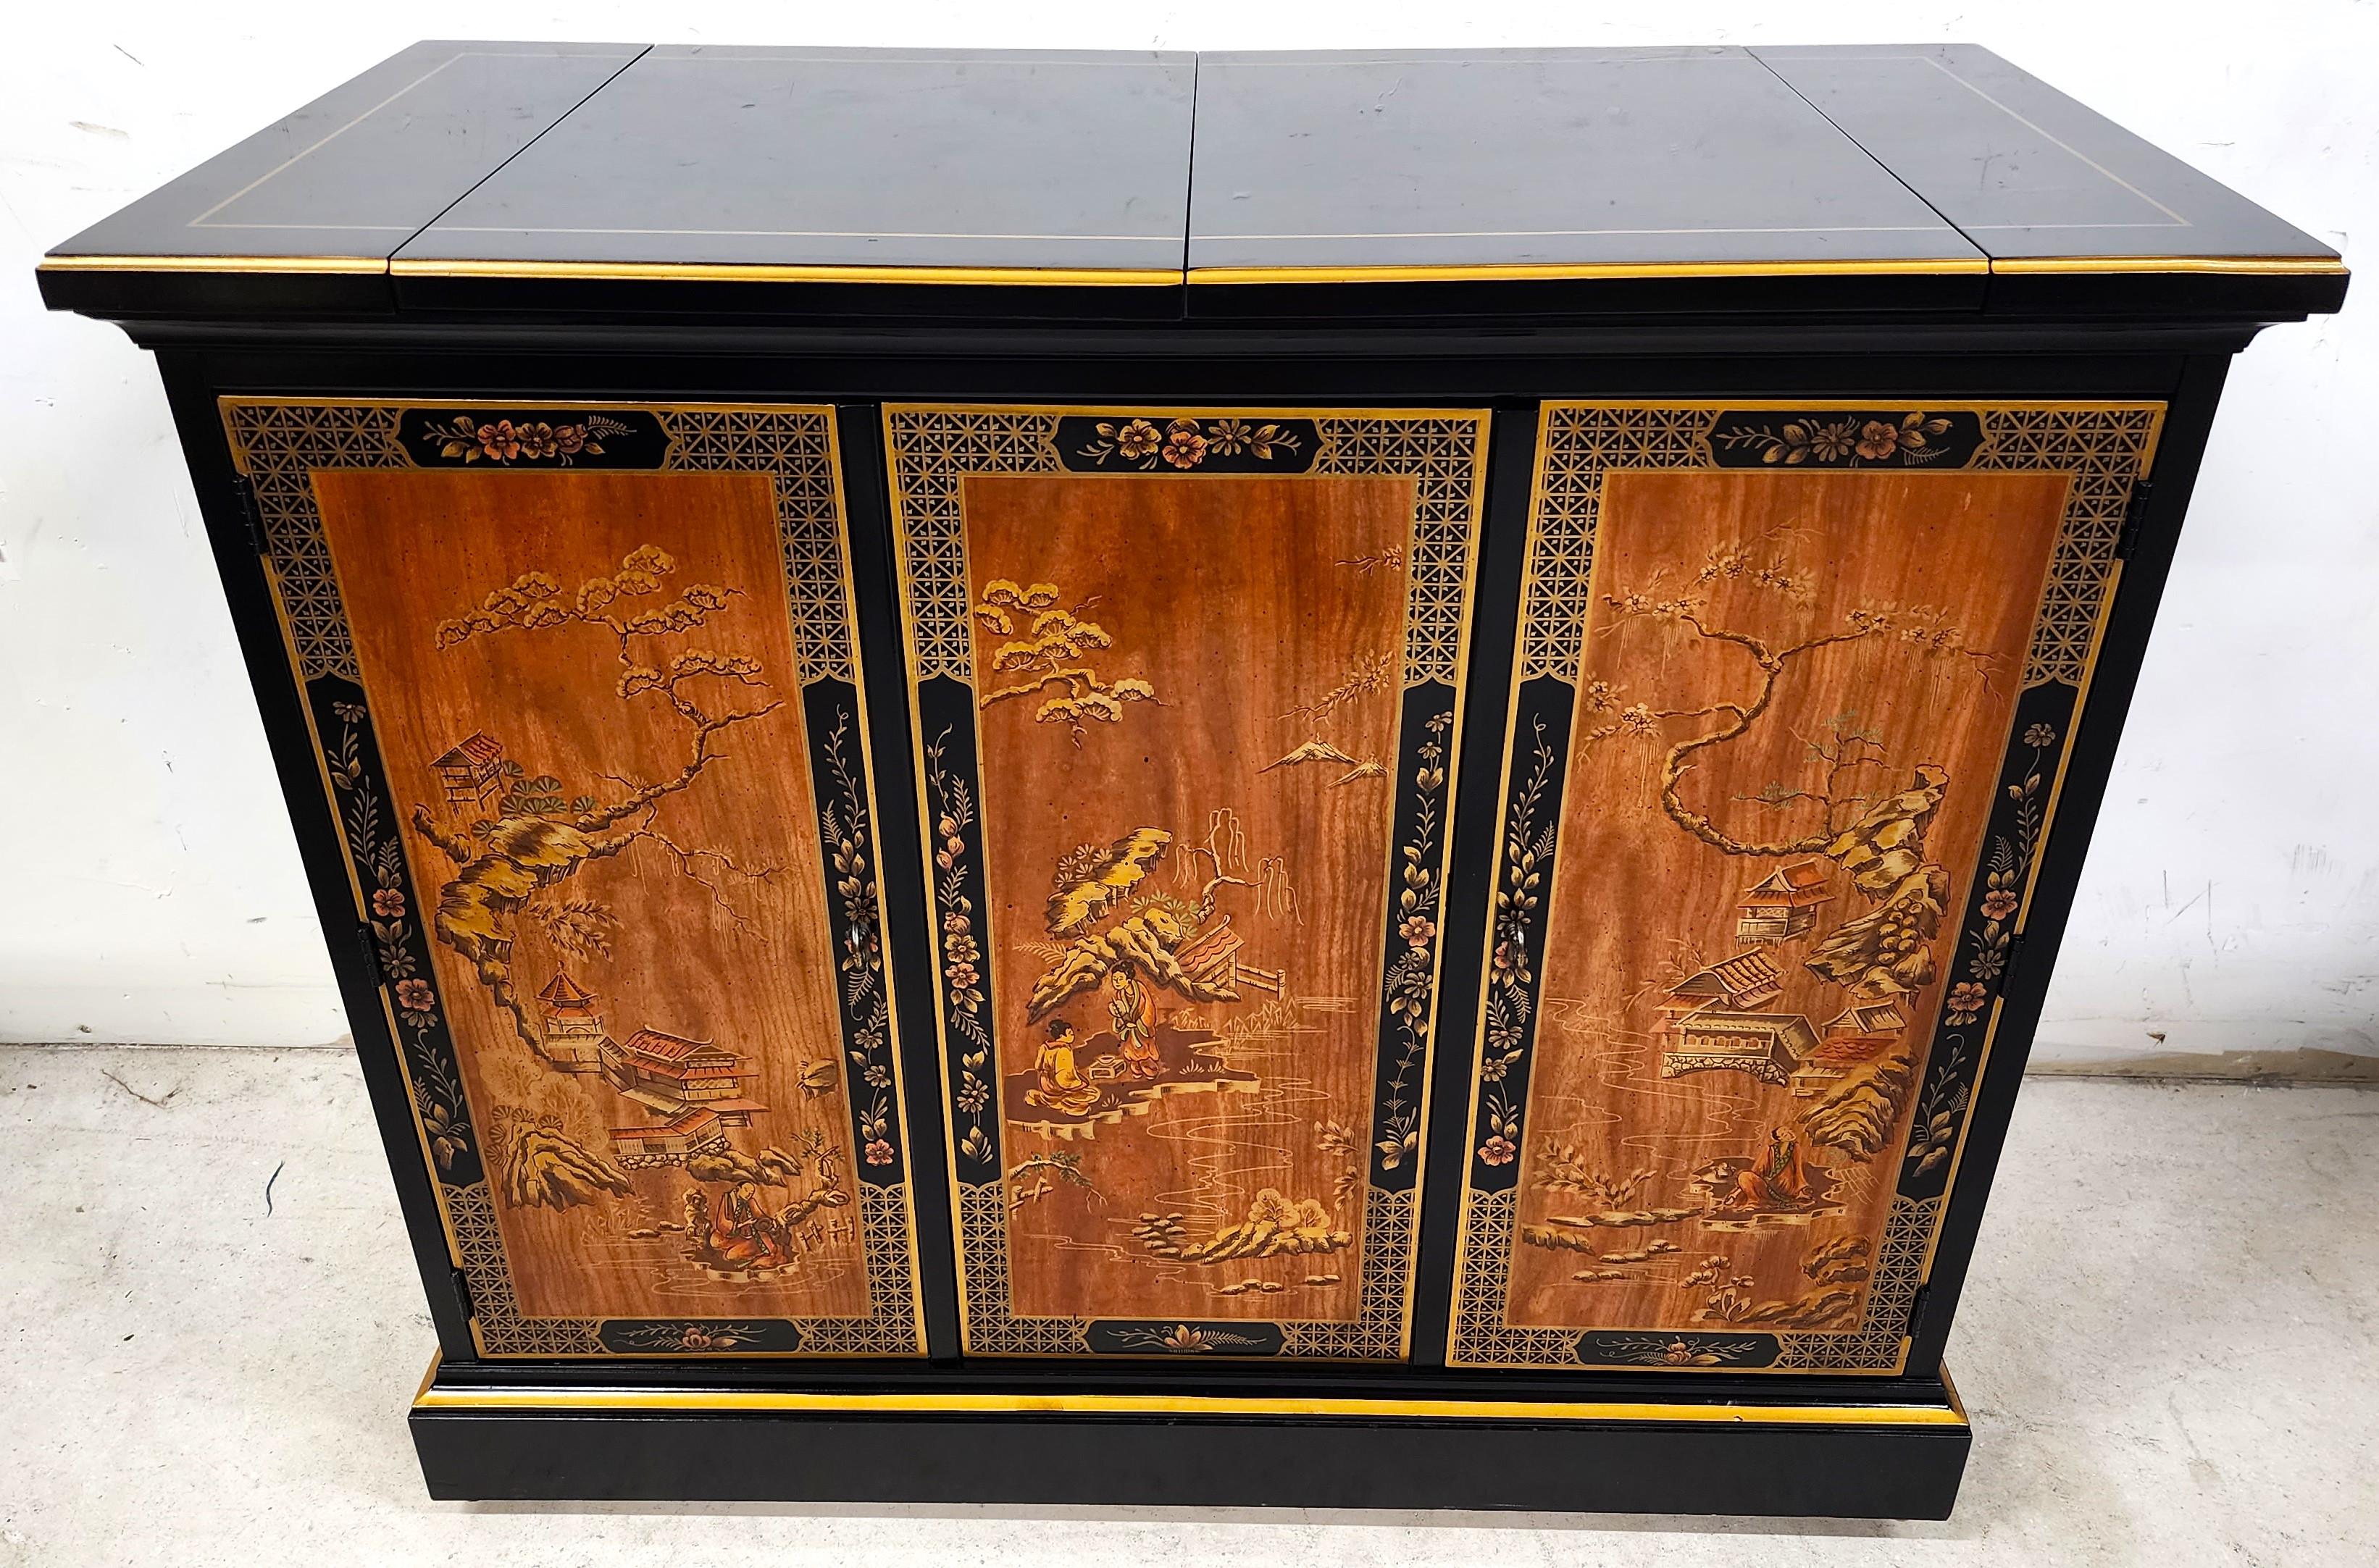 Offering One Of Our Recent Palm Beach Estate Fine Furniture Acquisitions Of A
Rolling Flip Top Drexel Et Cetera Chinoiserie buffet, cabinet, server or dry bar, circa 1978. A rectangular form with black lacquer and natural wood front finished in